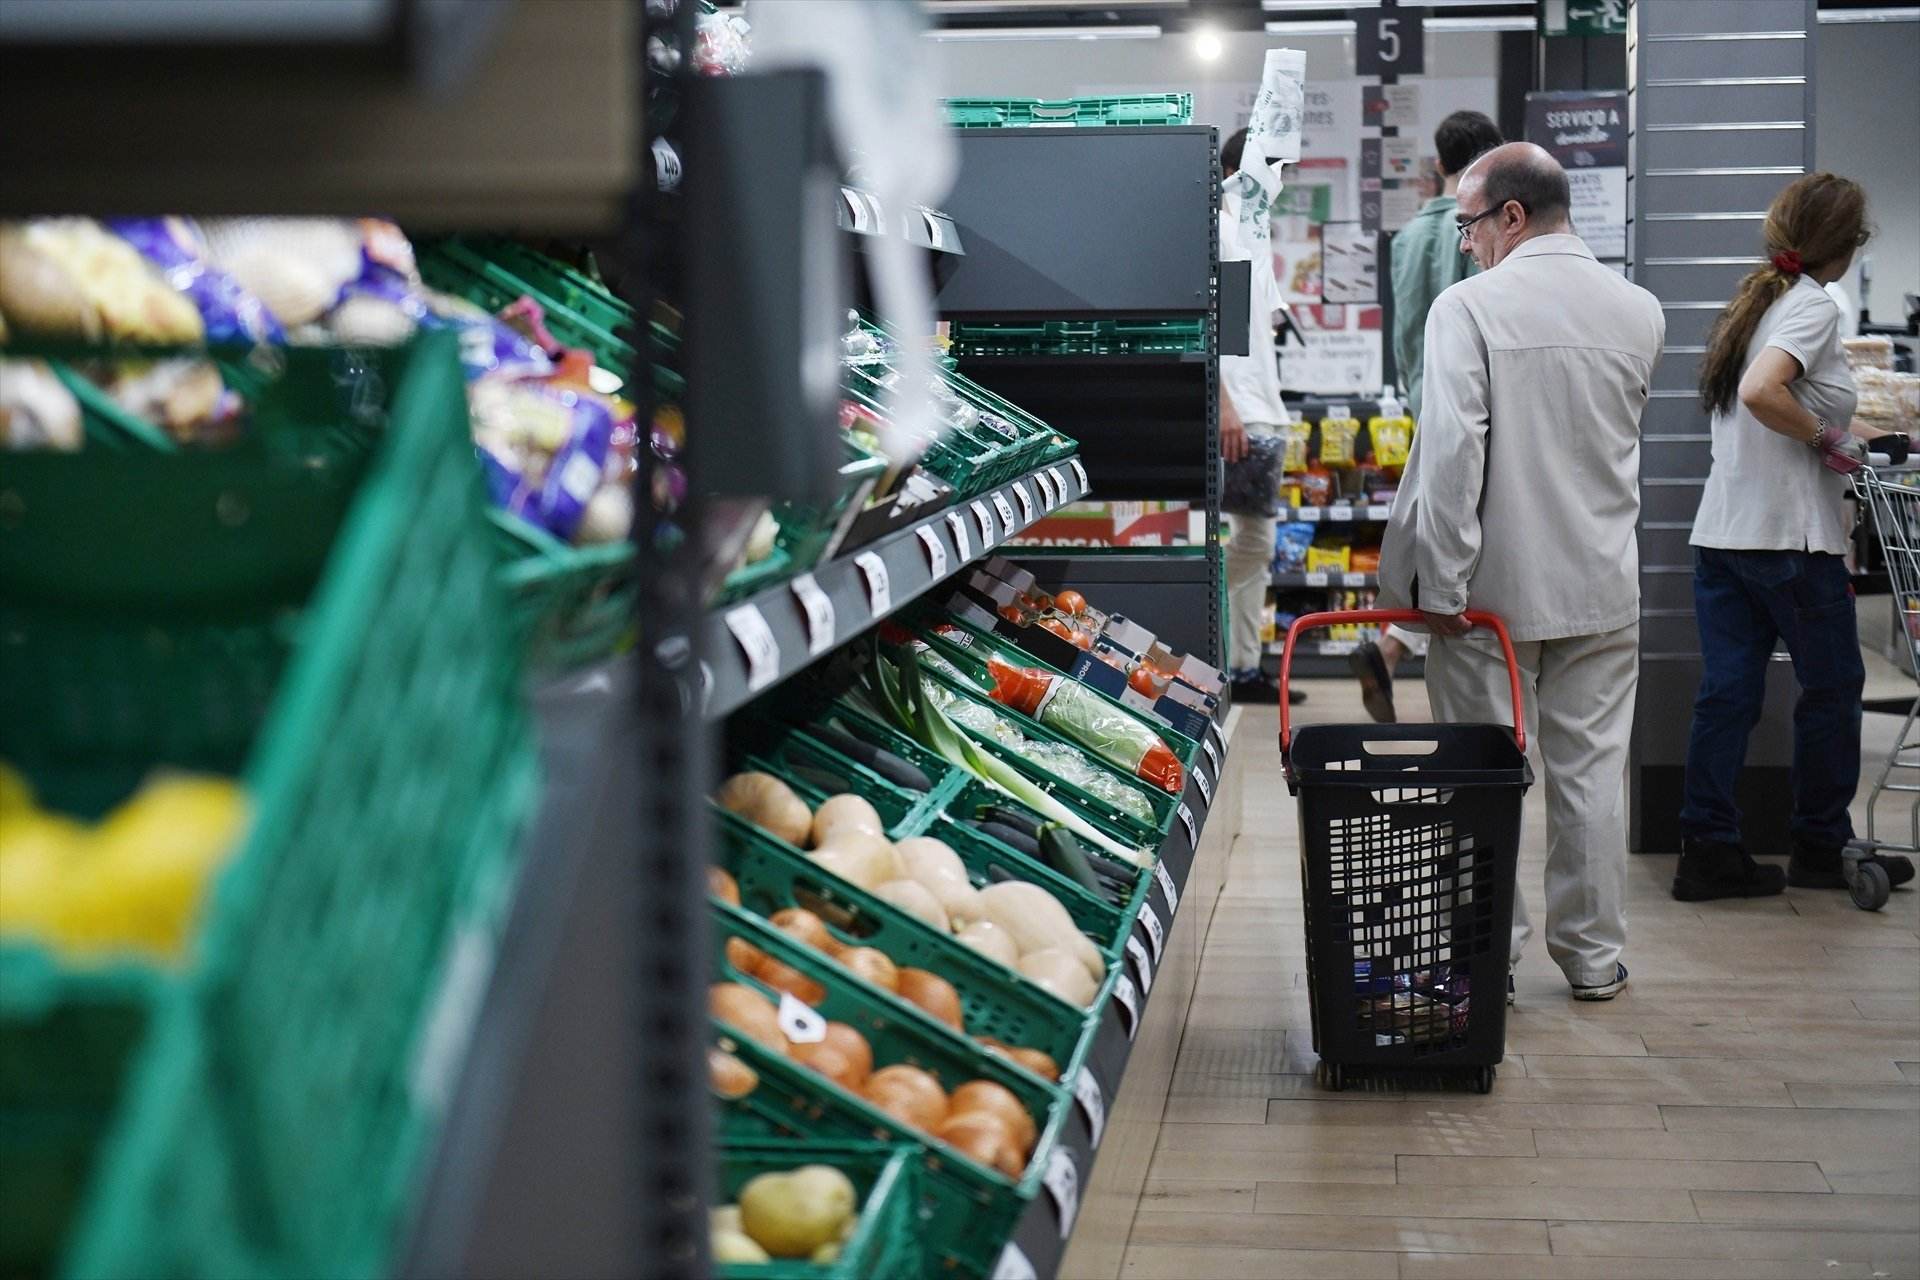 Inflation in Catalonia jumps 0.9% in a month to reach 3.4% in renewed upward trend